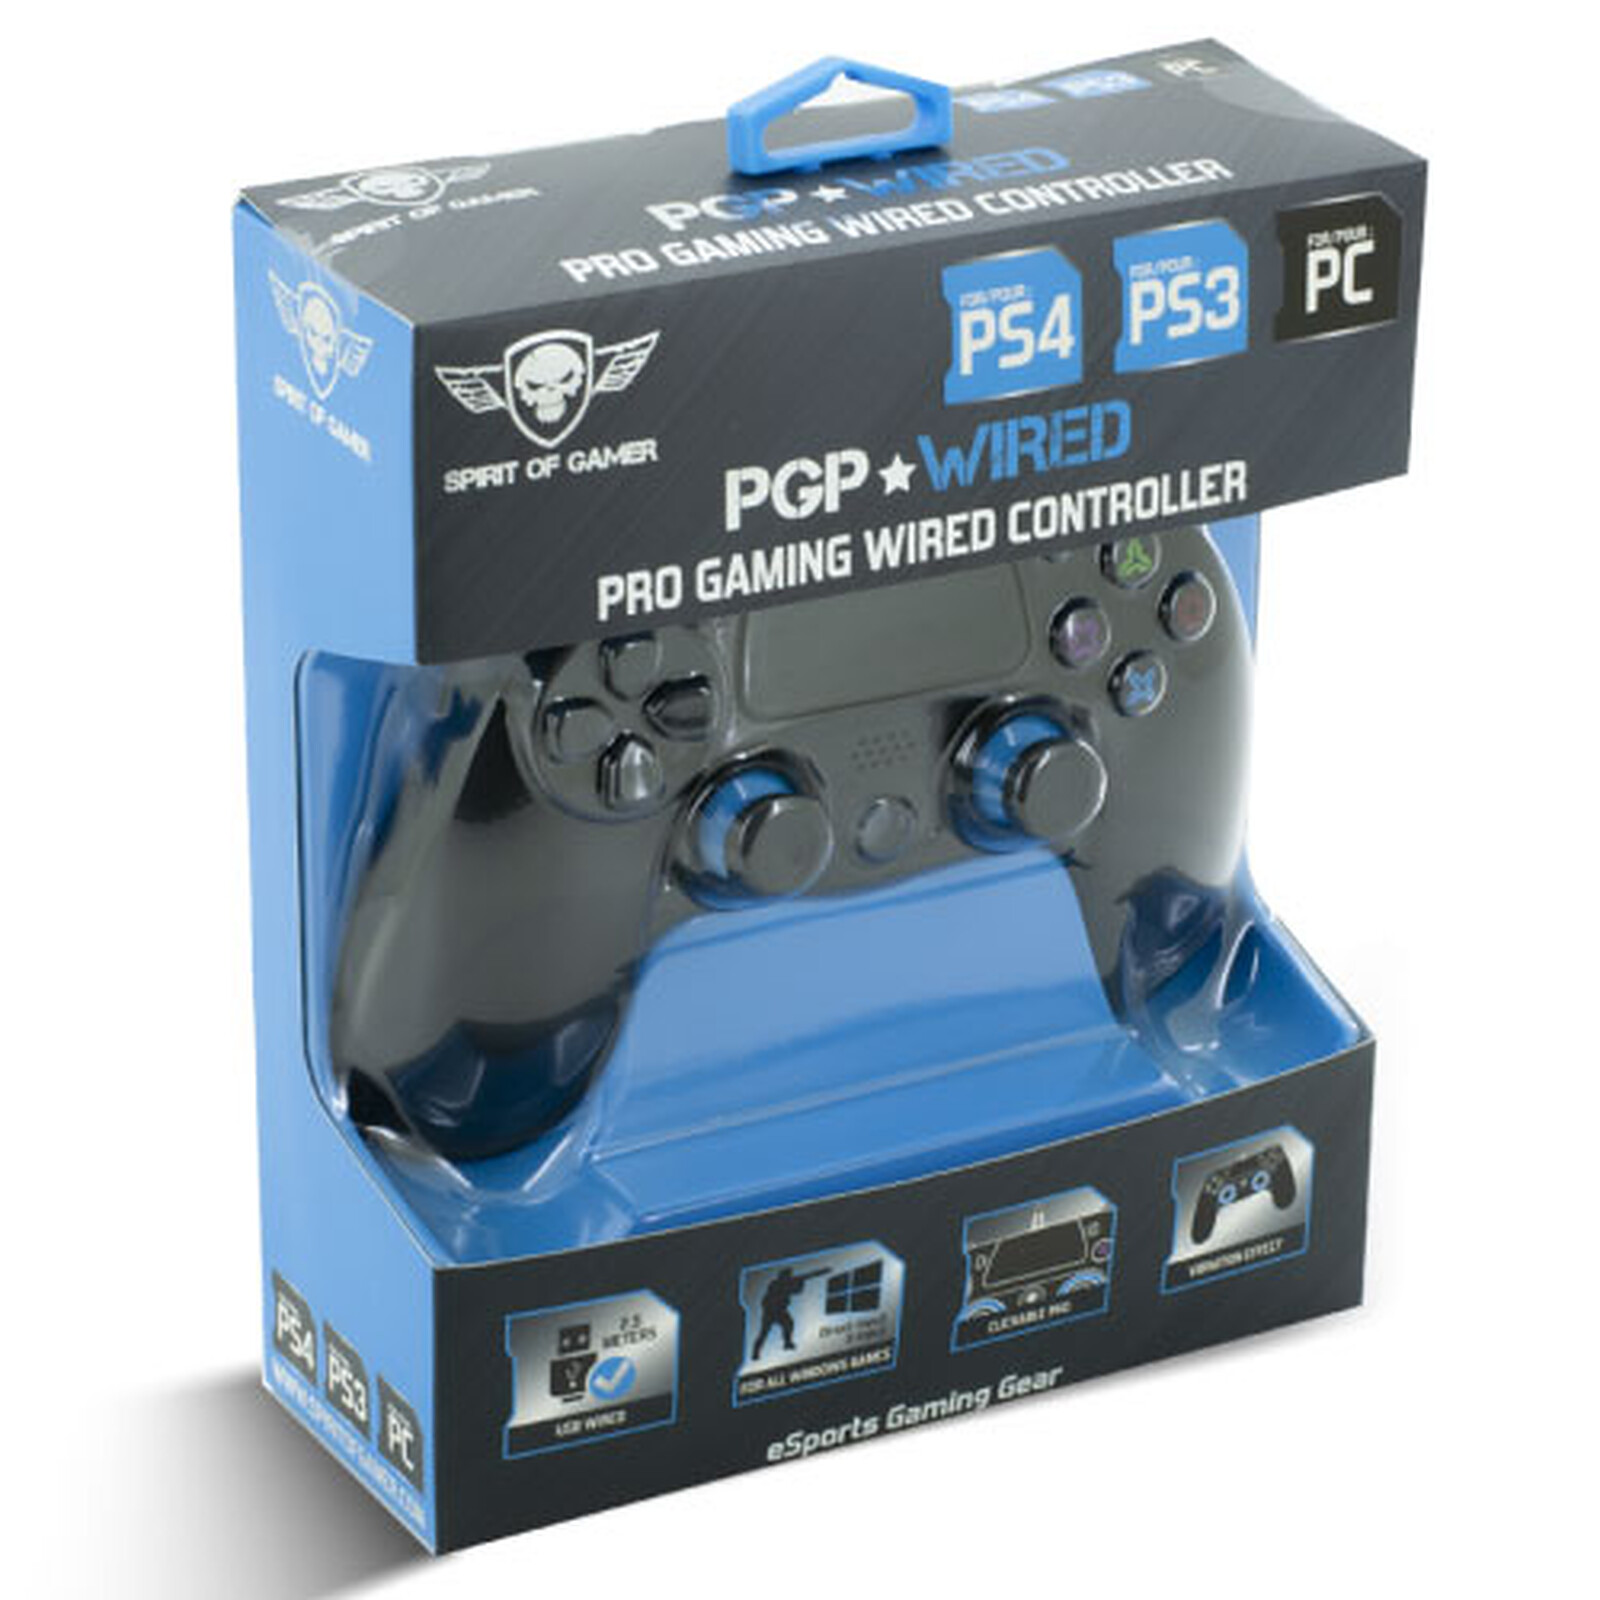 Spirit of Gamer Gamepad con cable (PS4/PS3/PC) Accesorios PS4 Spirit of en LDLC | ¡Musericordia!